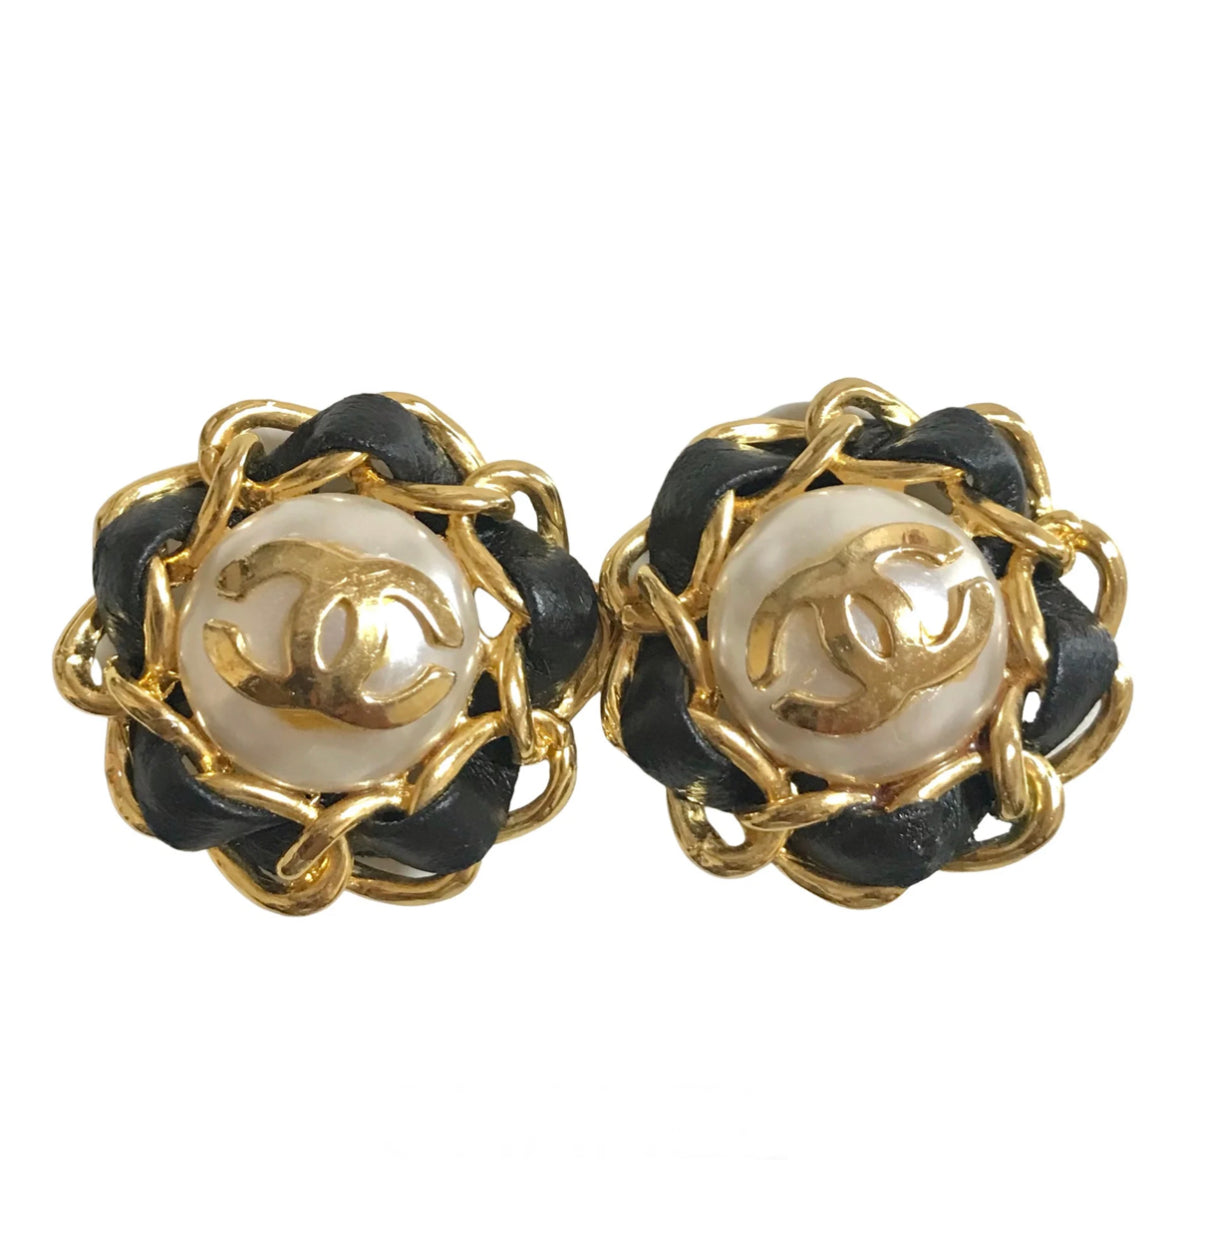 Vintage CHANEL earrings with golden CC, faux pearl, black leather and chain frame. Perfect Chanel jewelry